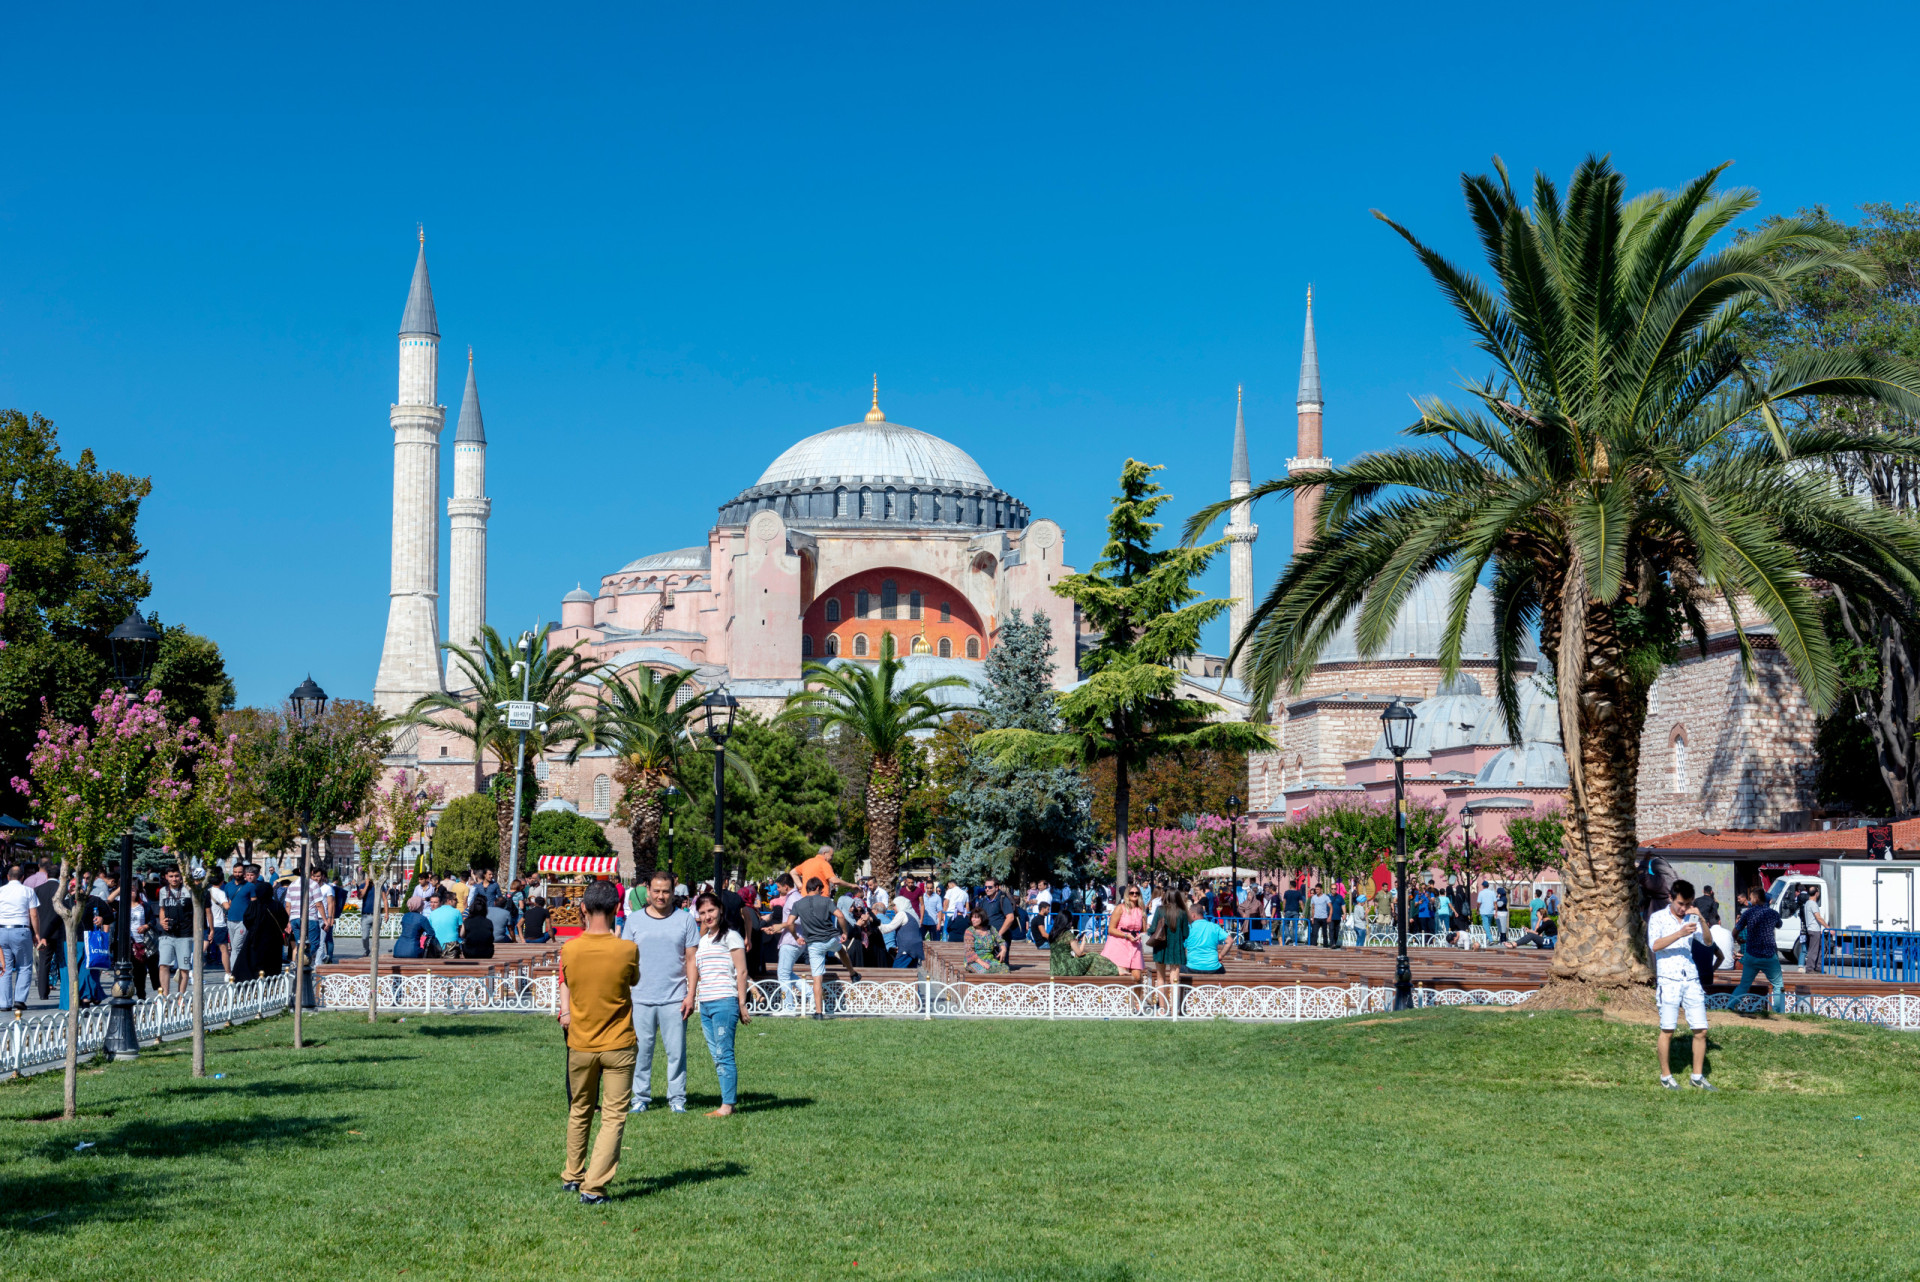 <p><span>Istanbul's Sultanahmet neighborhood </span><span>is home to</span><span> iconic landmarks like the Hagia Sophia and the Blue Mosque. The high volume of tourists makes the area prone to pickpockets.</span></p><p>You may also like:<a href="https://www.starsinsider.com/n/433536?utm_source=msn.com&utm_medium=display&utm_campaign=referral_description&utm_content=717448en-us"> The 30 worst habits when you're stuck at home</a></p>